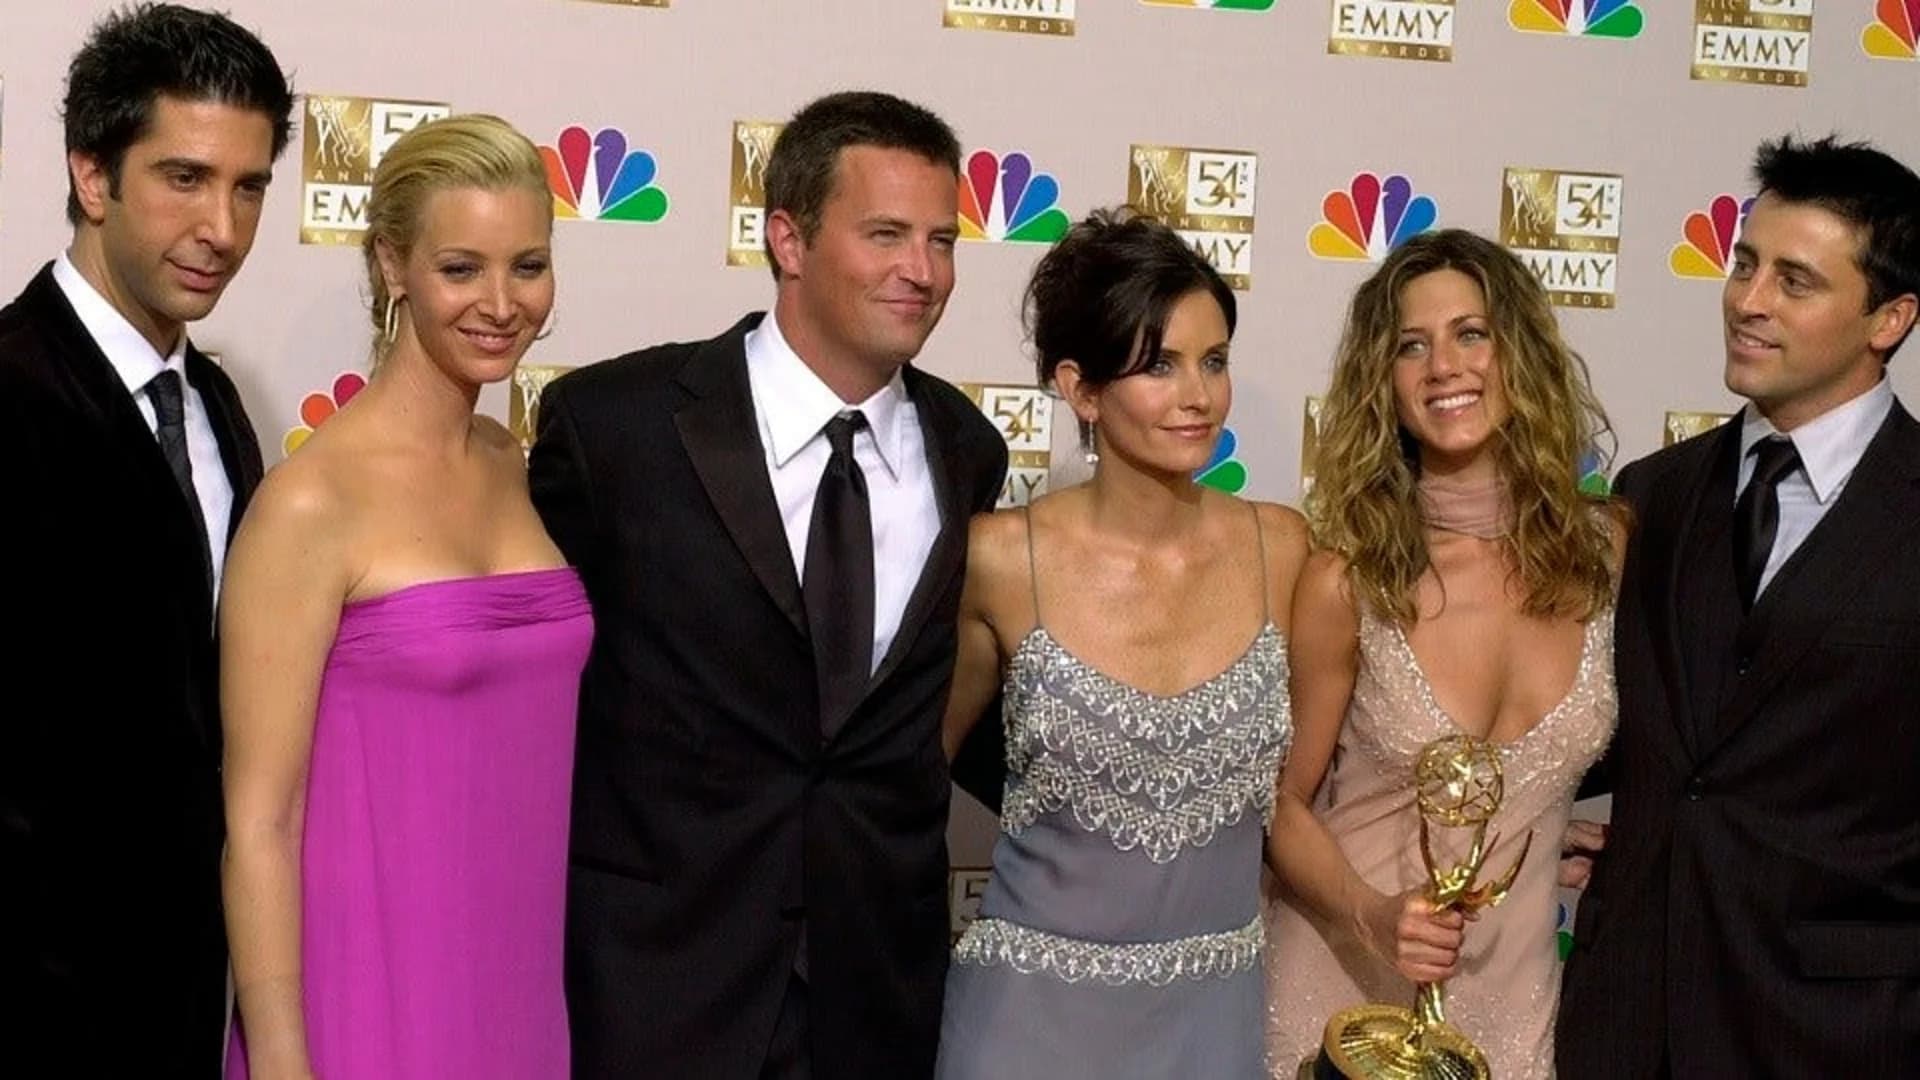 'It's happening': Unscripted 'Friends' reunion special is in the works